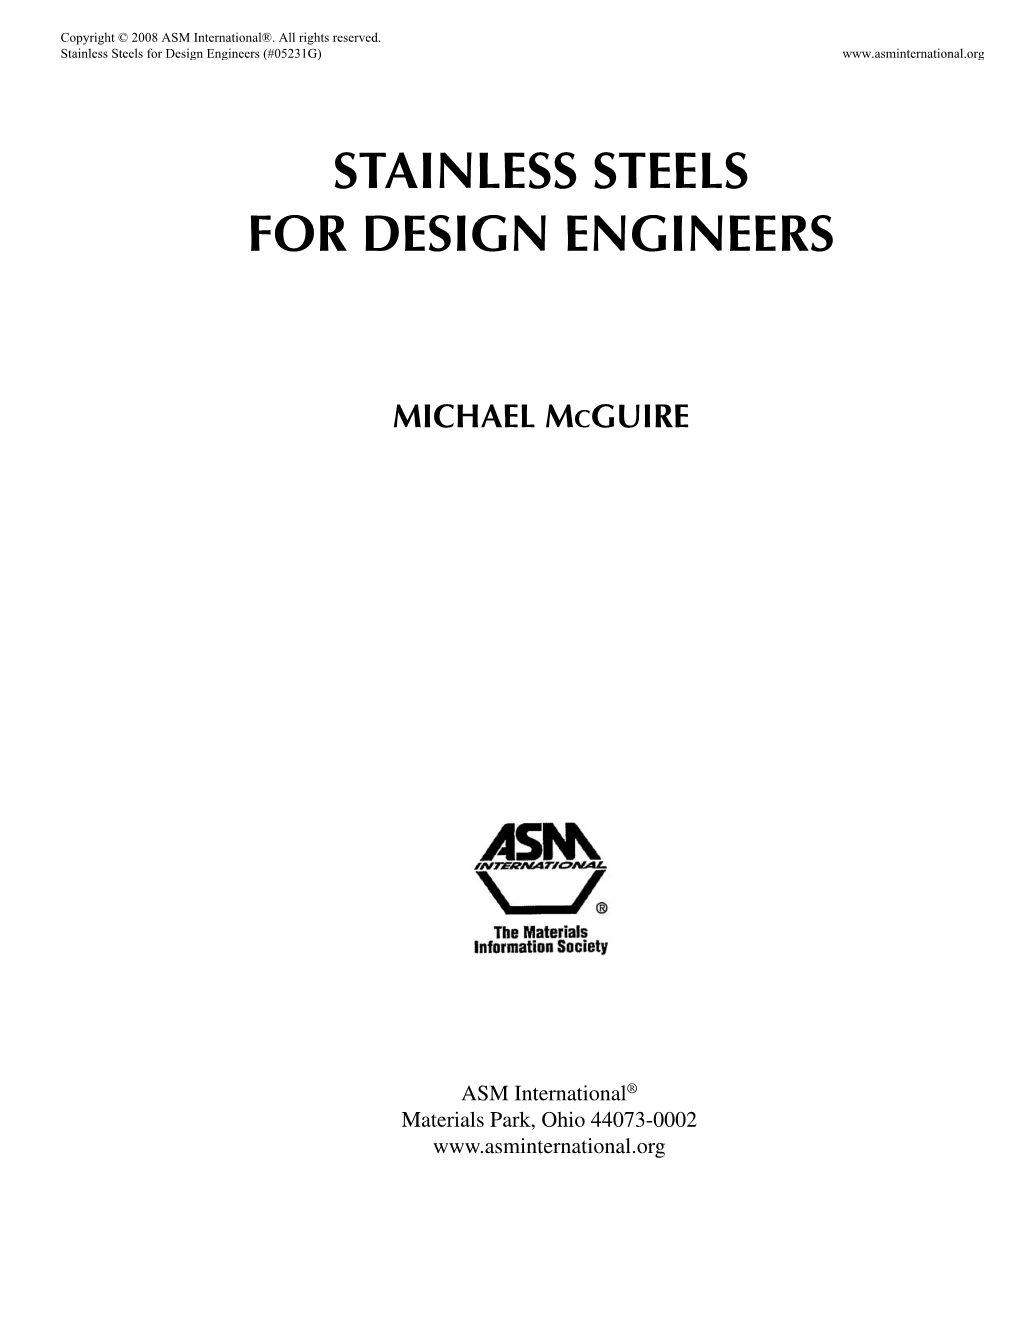 Stainless Steels for Design Engineers (#05231G)